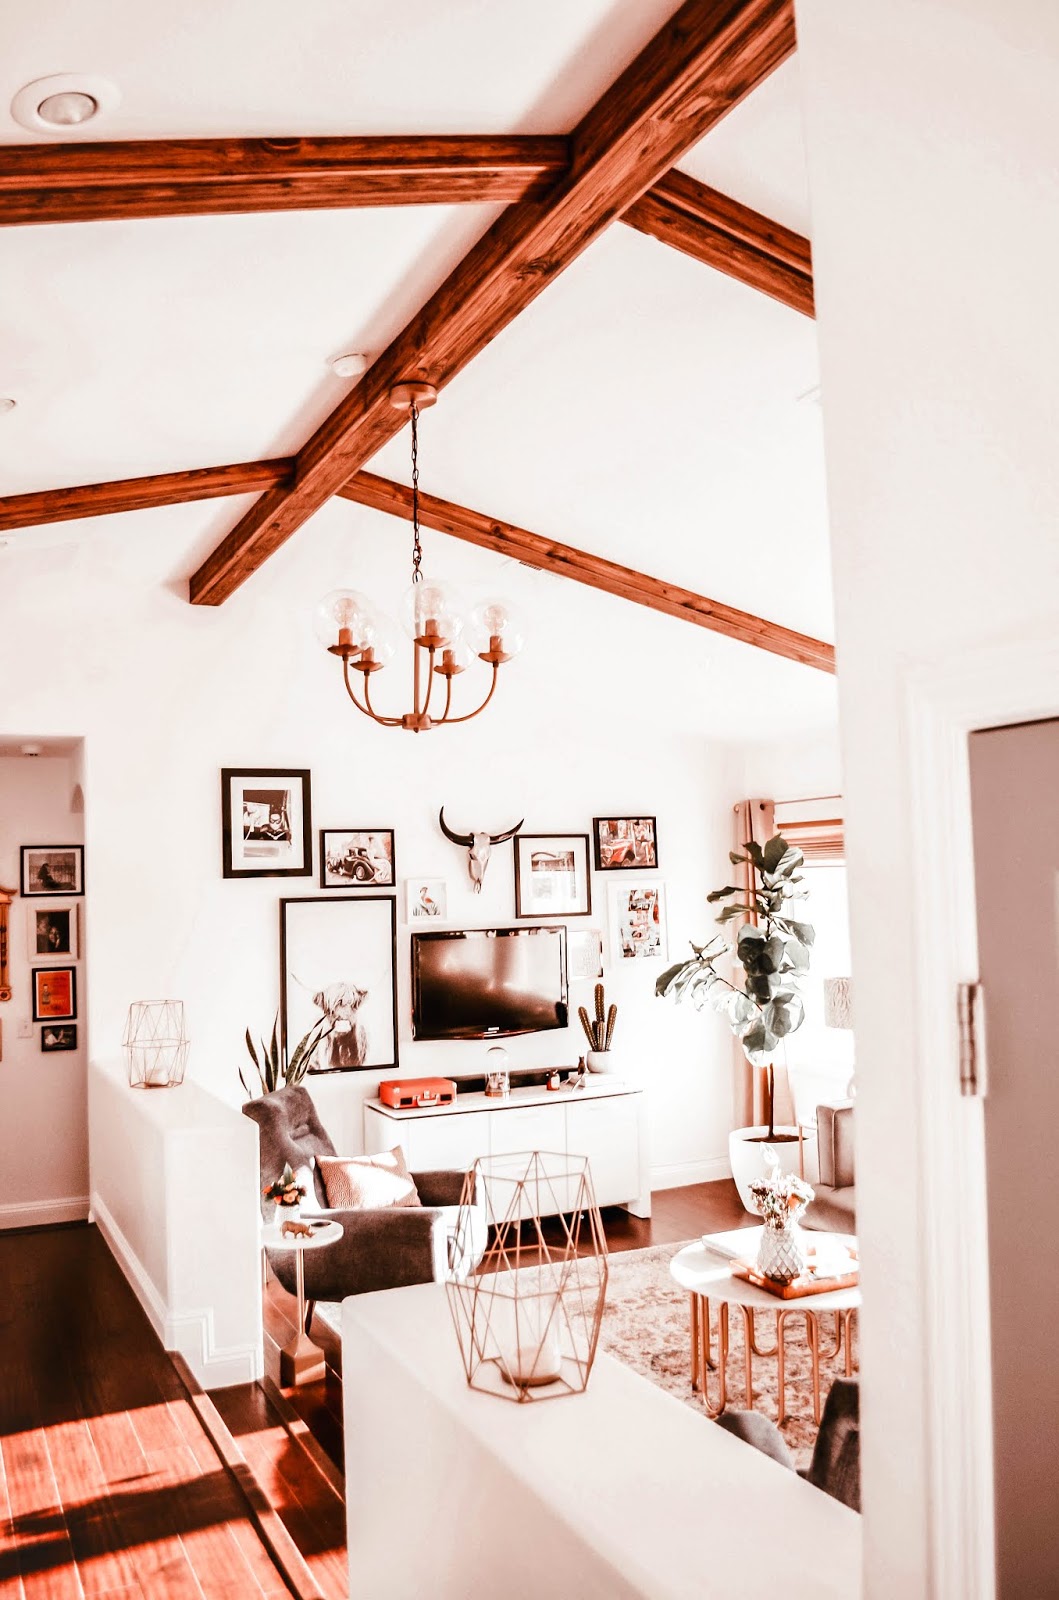 1980s-style-house-livingroom-renovation-update-with-reclaimed-wood-beams-to-cathedral-ceilings